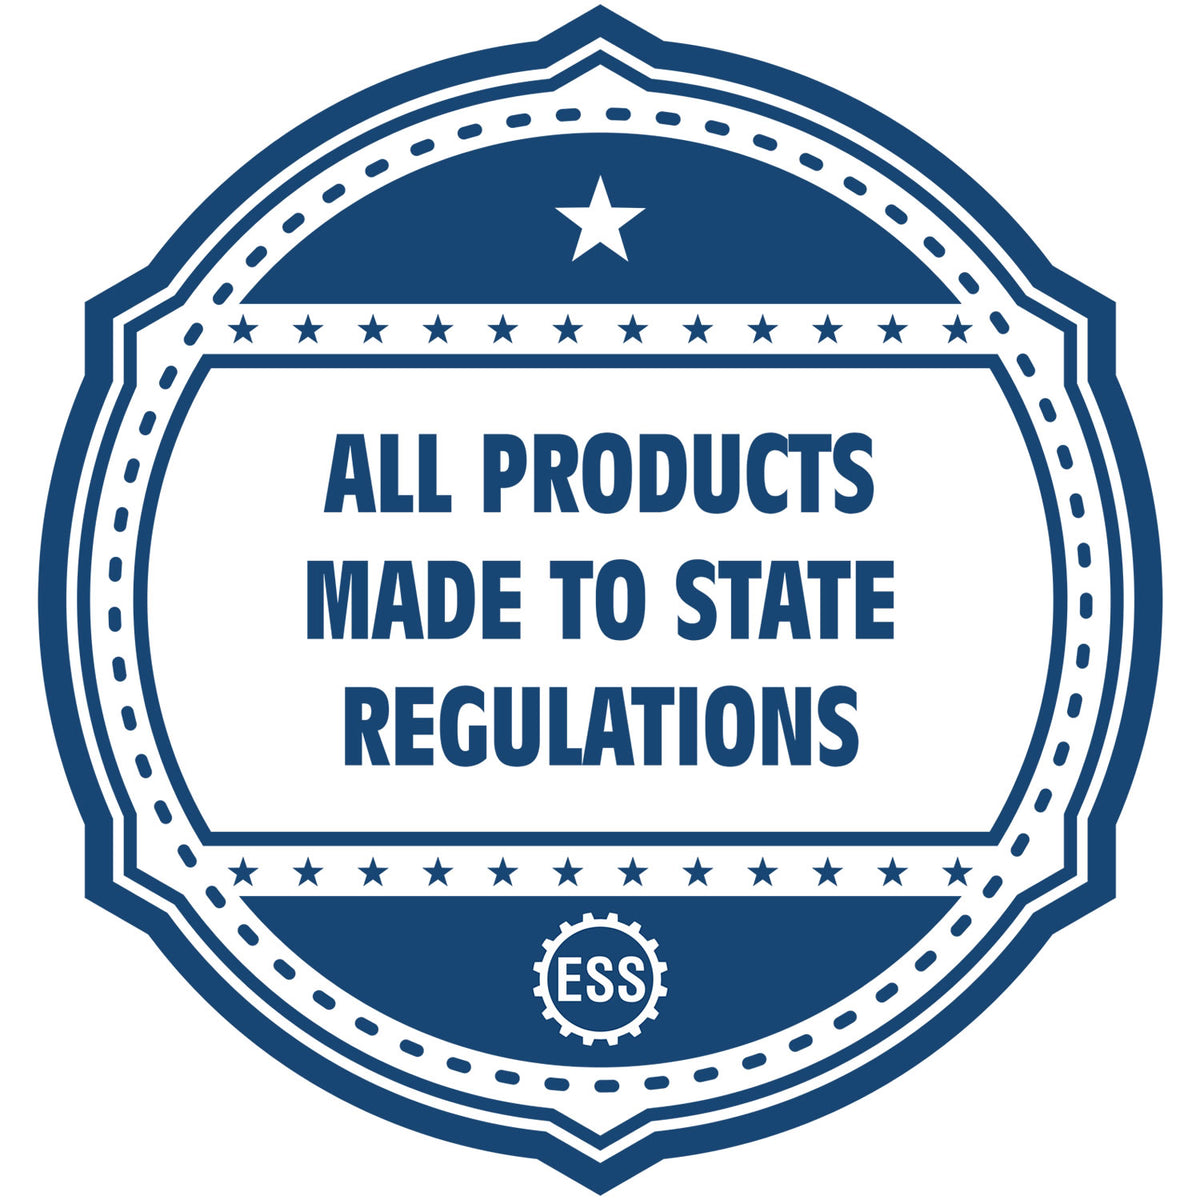 A blue icon or badge for the Hybrid Washington Landscape Architect Seal showing that this product is made in compliance with state regulations.